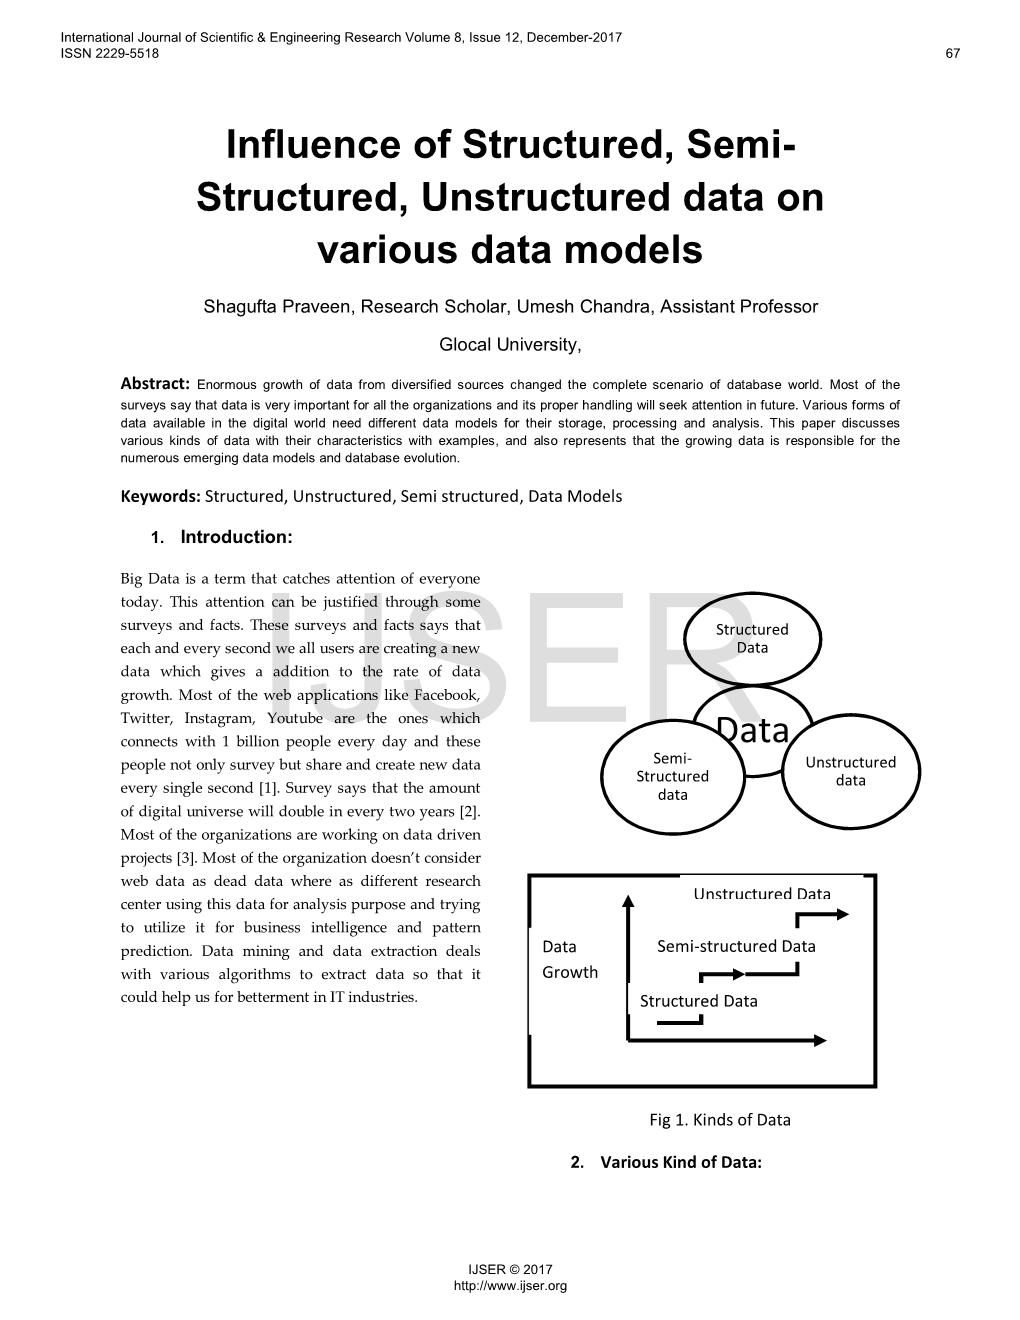 Influence of Structured, Semi-Structured, Unstructured Data